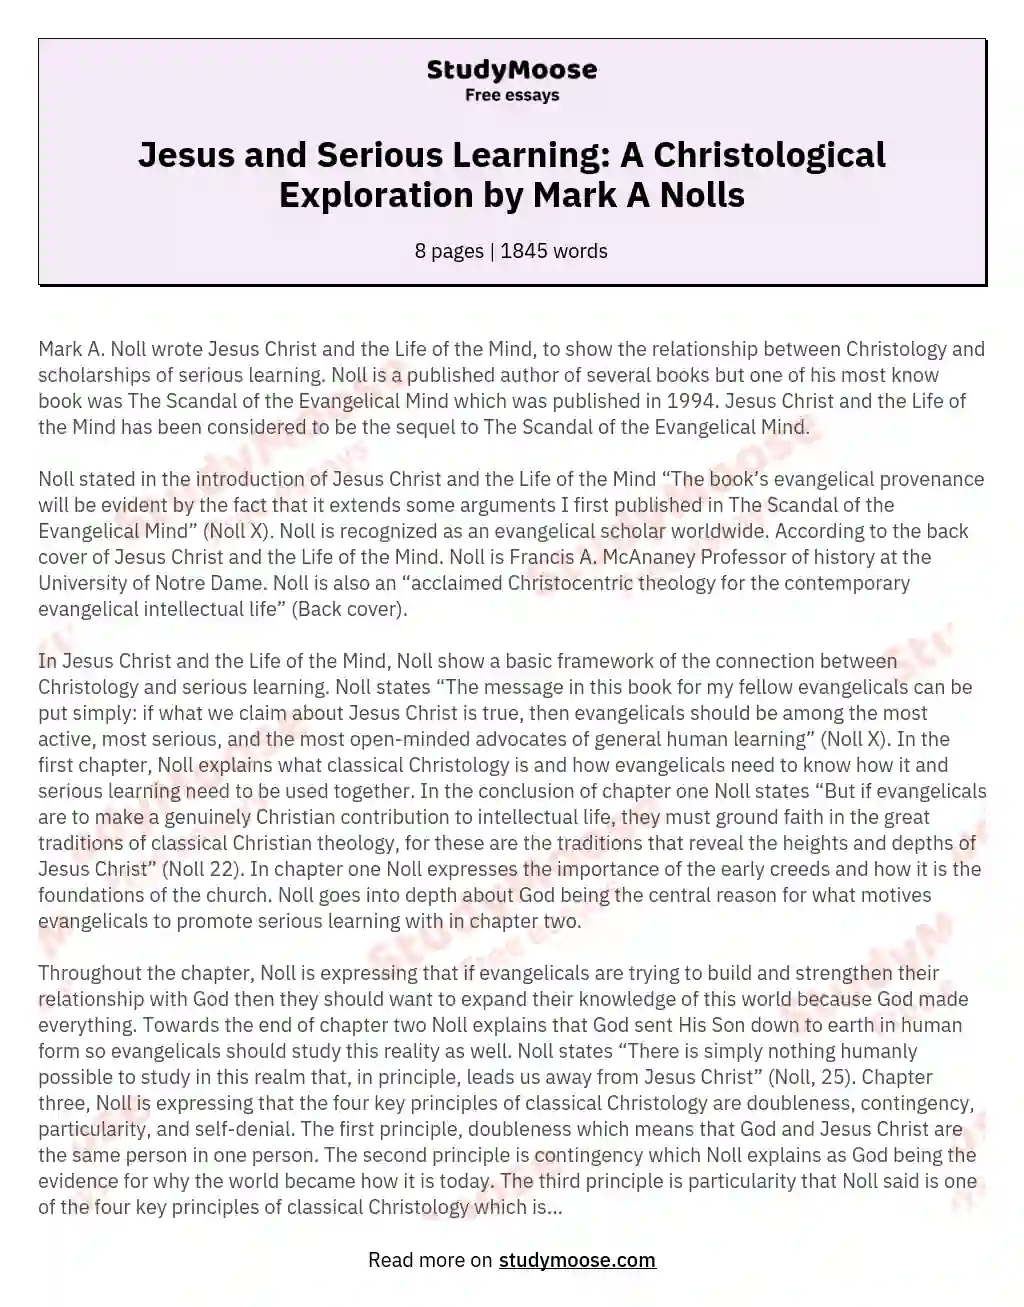 Jesus and Serious Learning: A Christological Exploration by Mark A Nolls essay